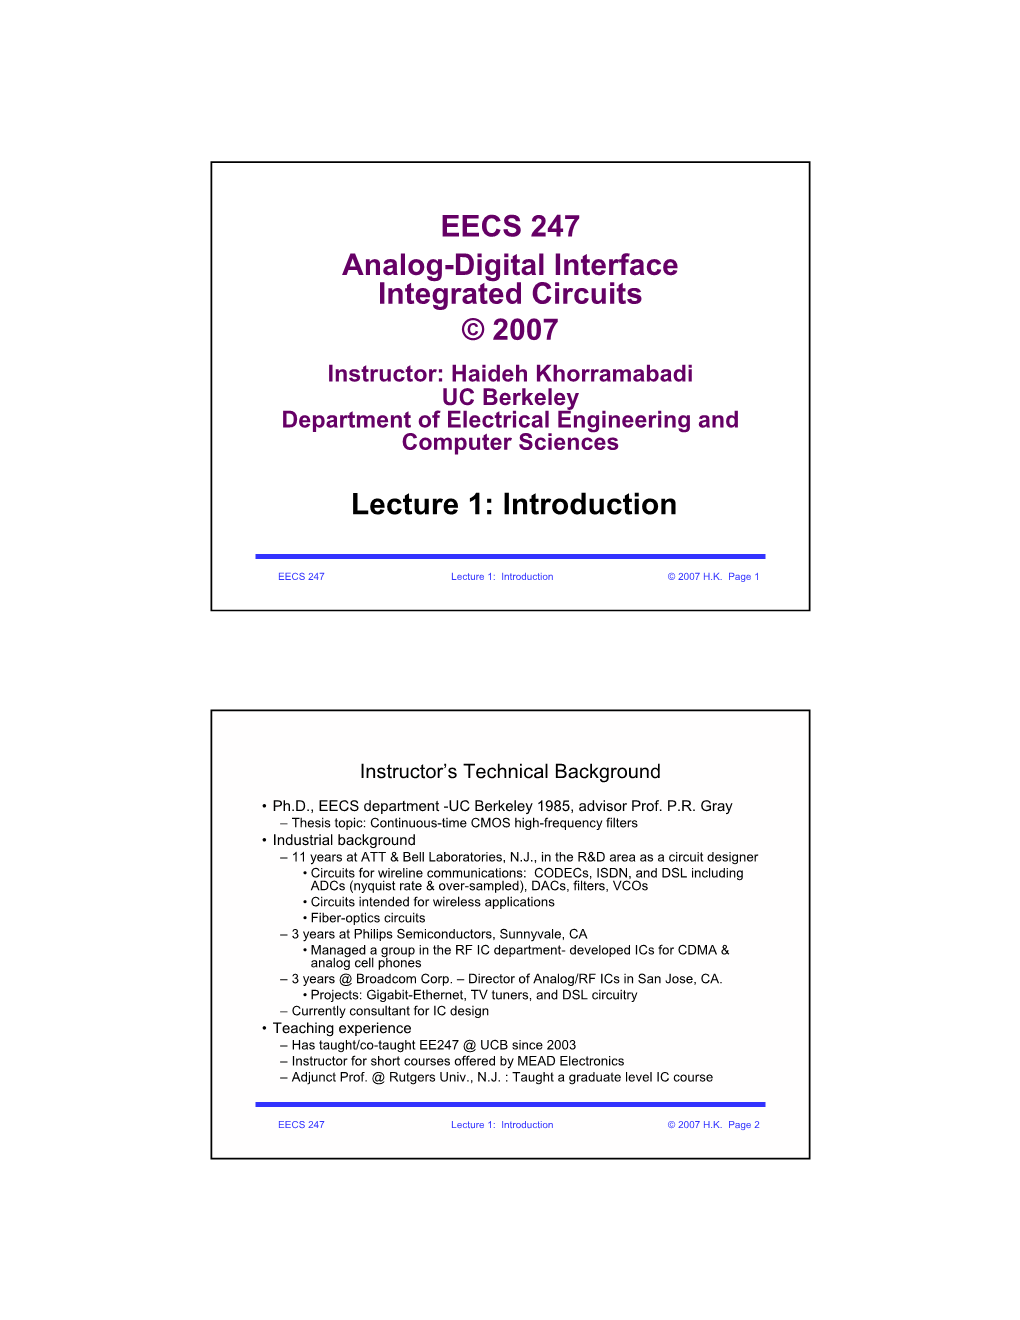 EECS 247 Analog-Digital Interface Integrated Circuits © 2007 Lecture